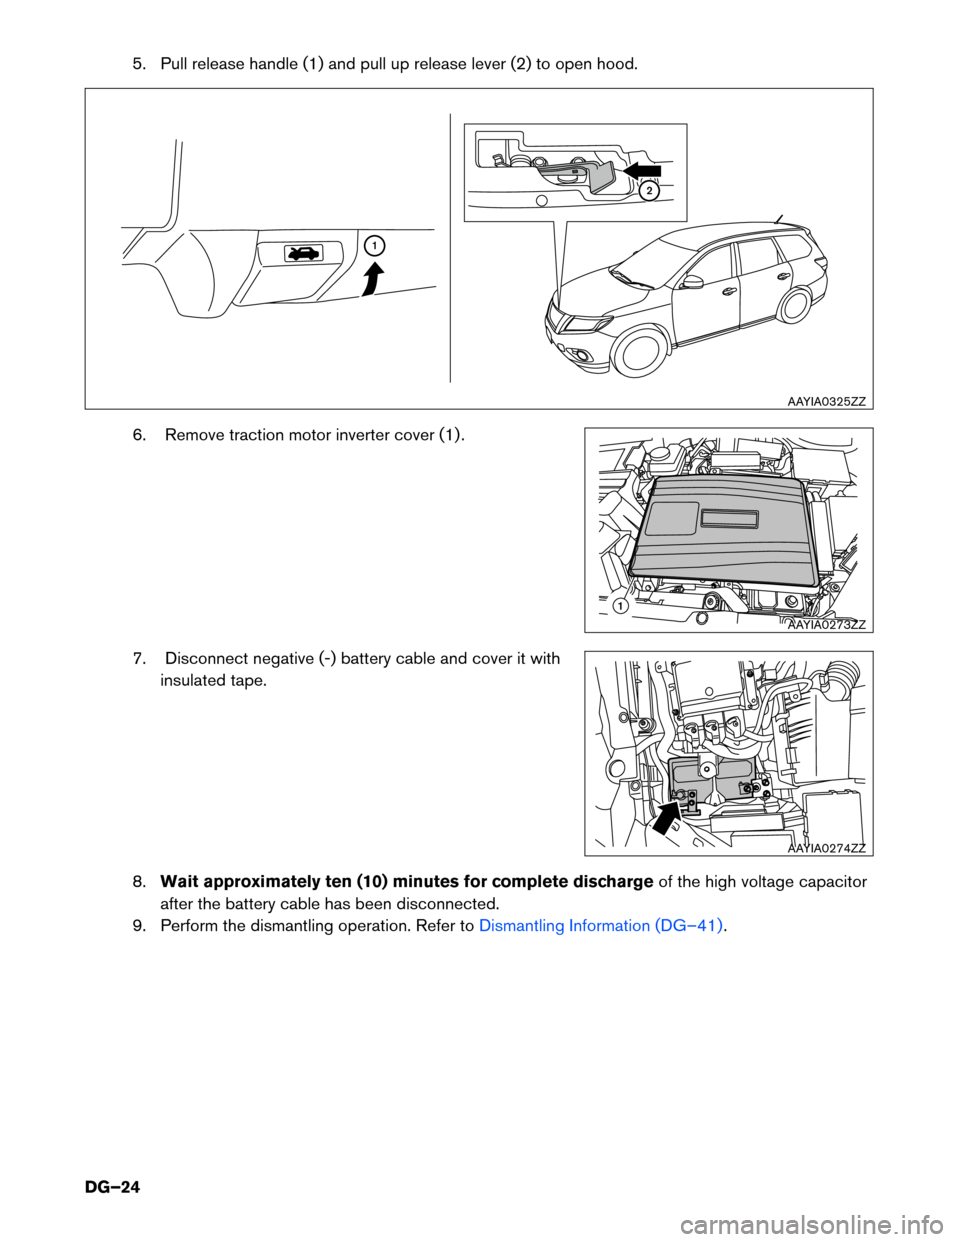 NISSAN PATHFINDER HYBRID 2014 R52 / 4.G Dismantling Guide 5. Pull release handle (1) and pull up release lever (2) to open hood. 
6. Remove traction motor inverter cover (1) . 
7. Disconnect negative (-) battery cable and cover it withinsulated tape.
8. Wait